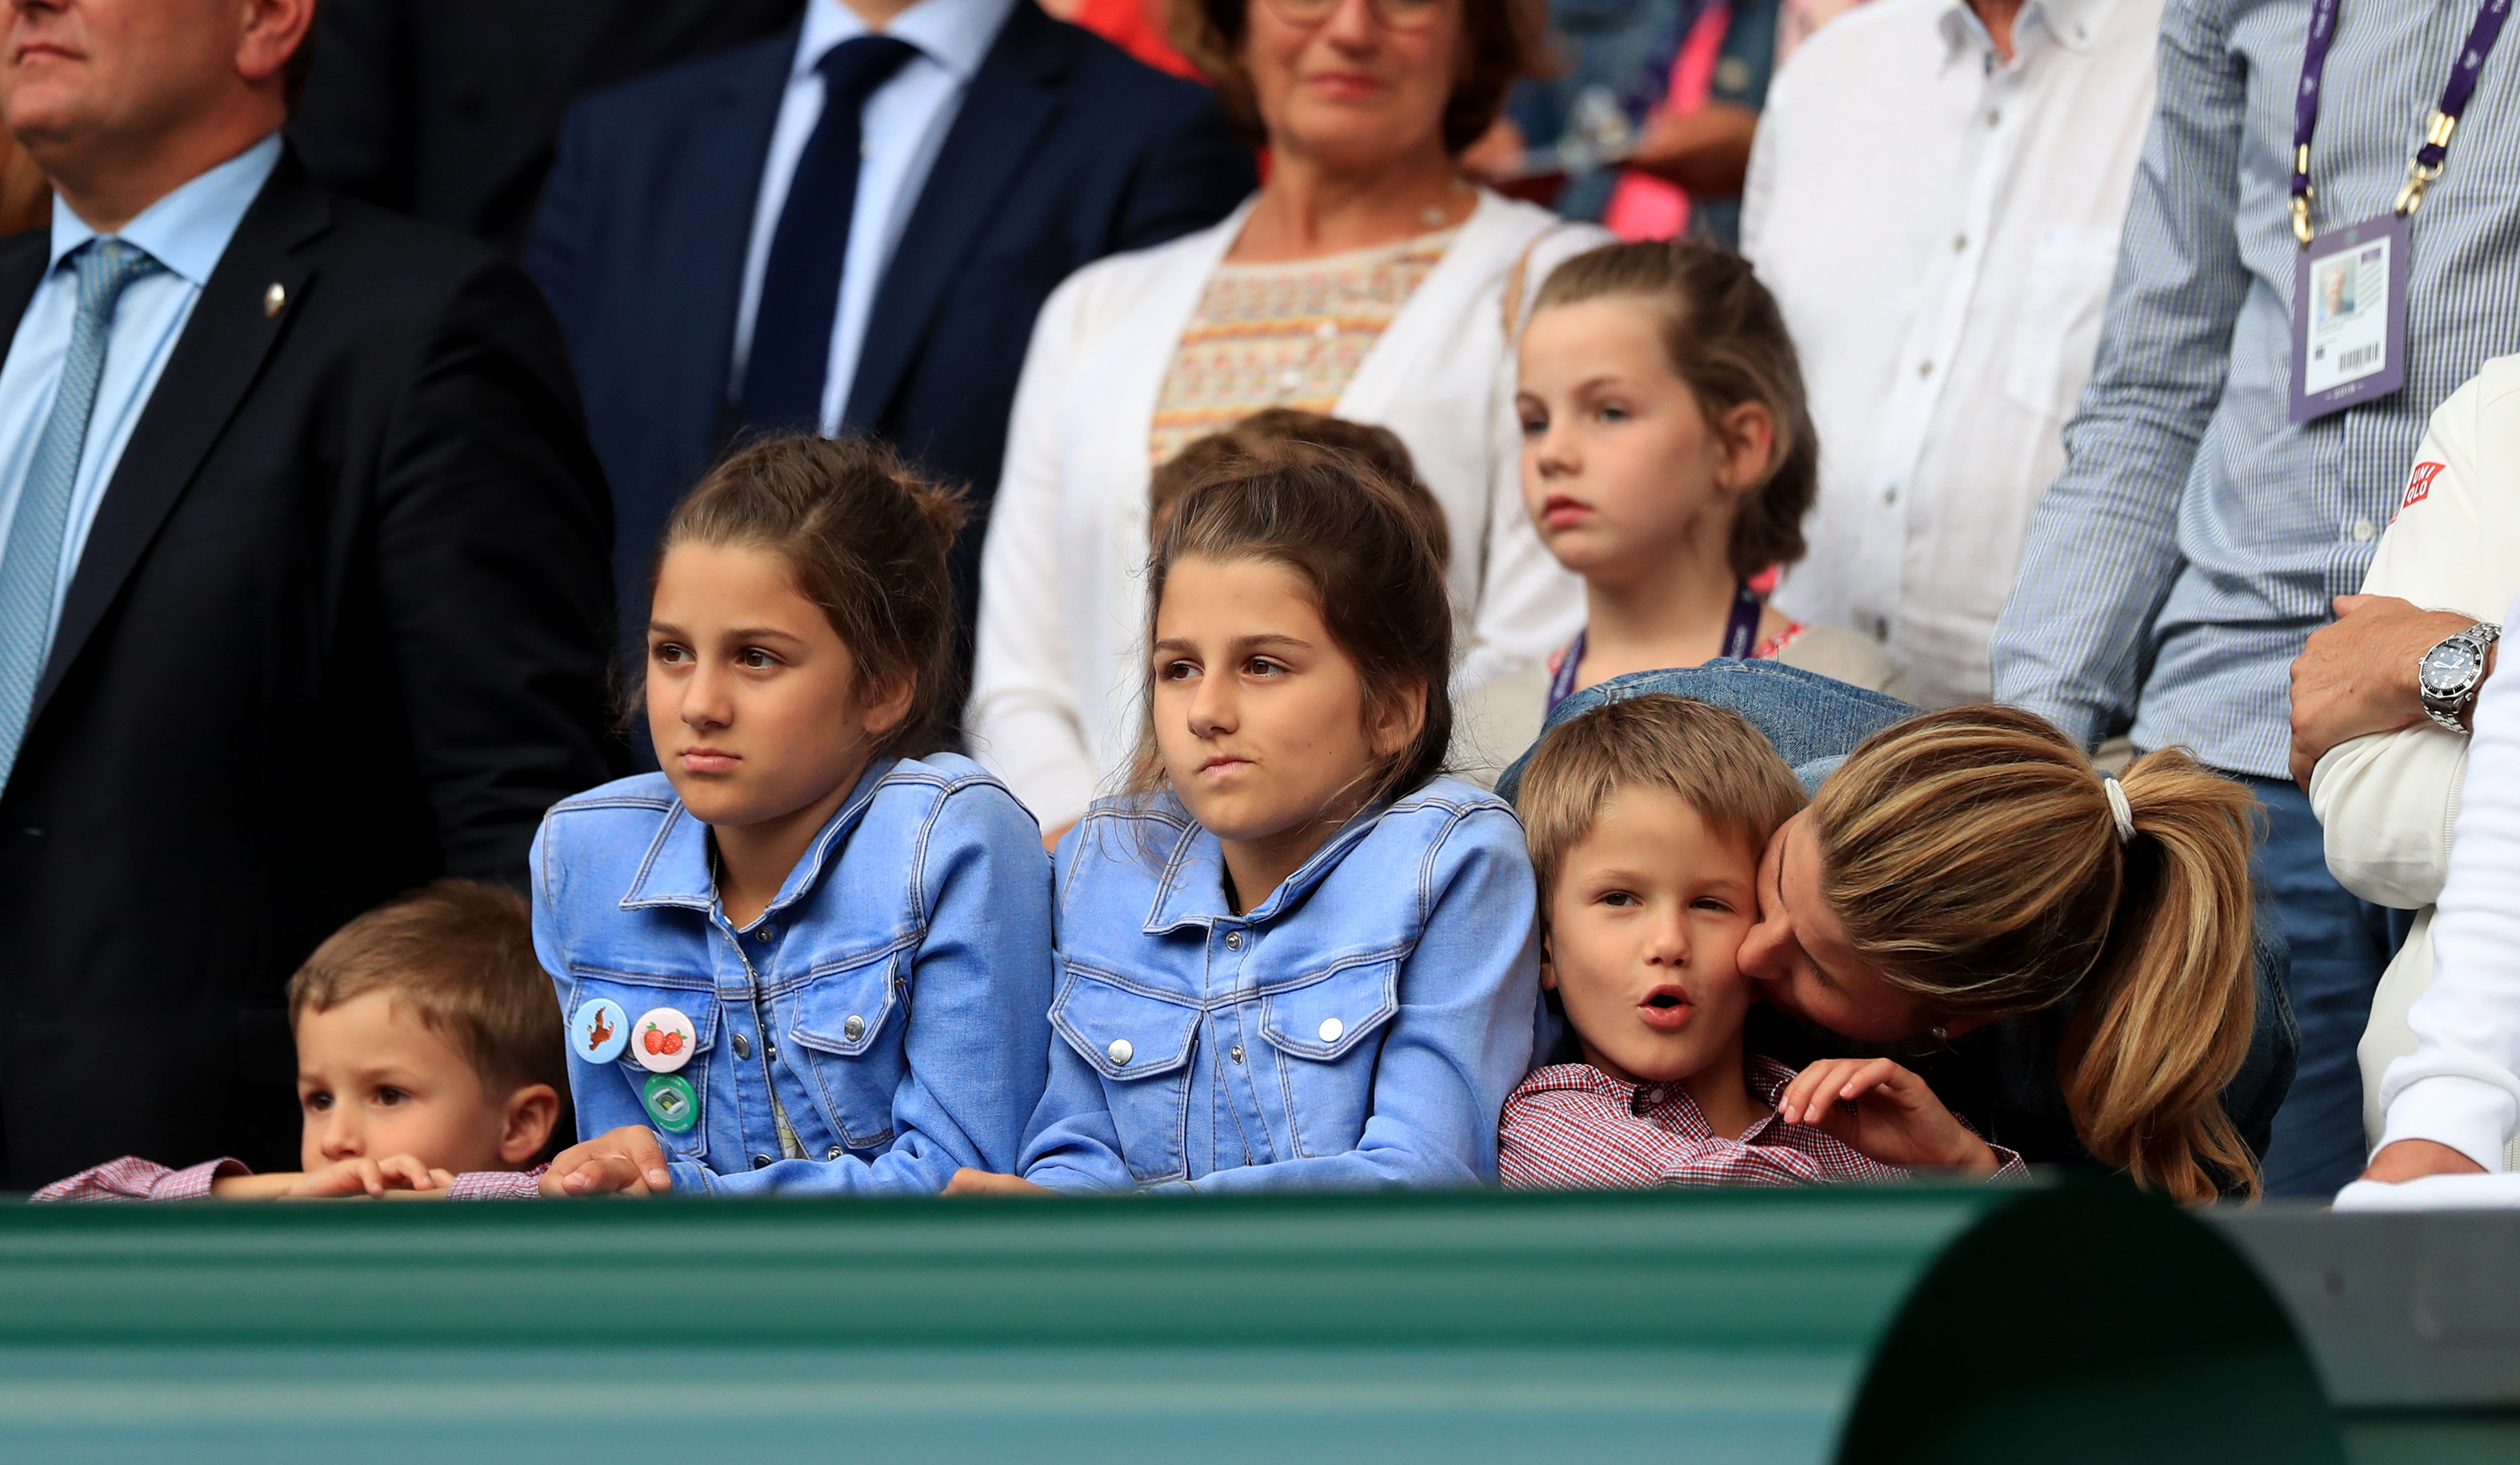 Myla Rose and Charlene Riva Federer with their twin brothers Leo and Lennert, and mother Mirka Federer at Wimbledon on July 14, 2019. | Source: Getty Images